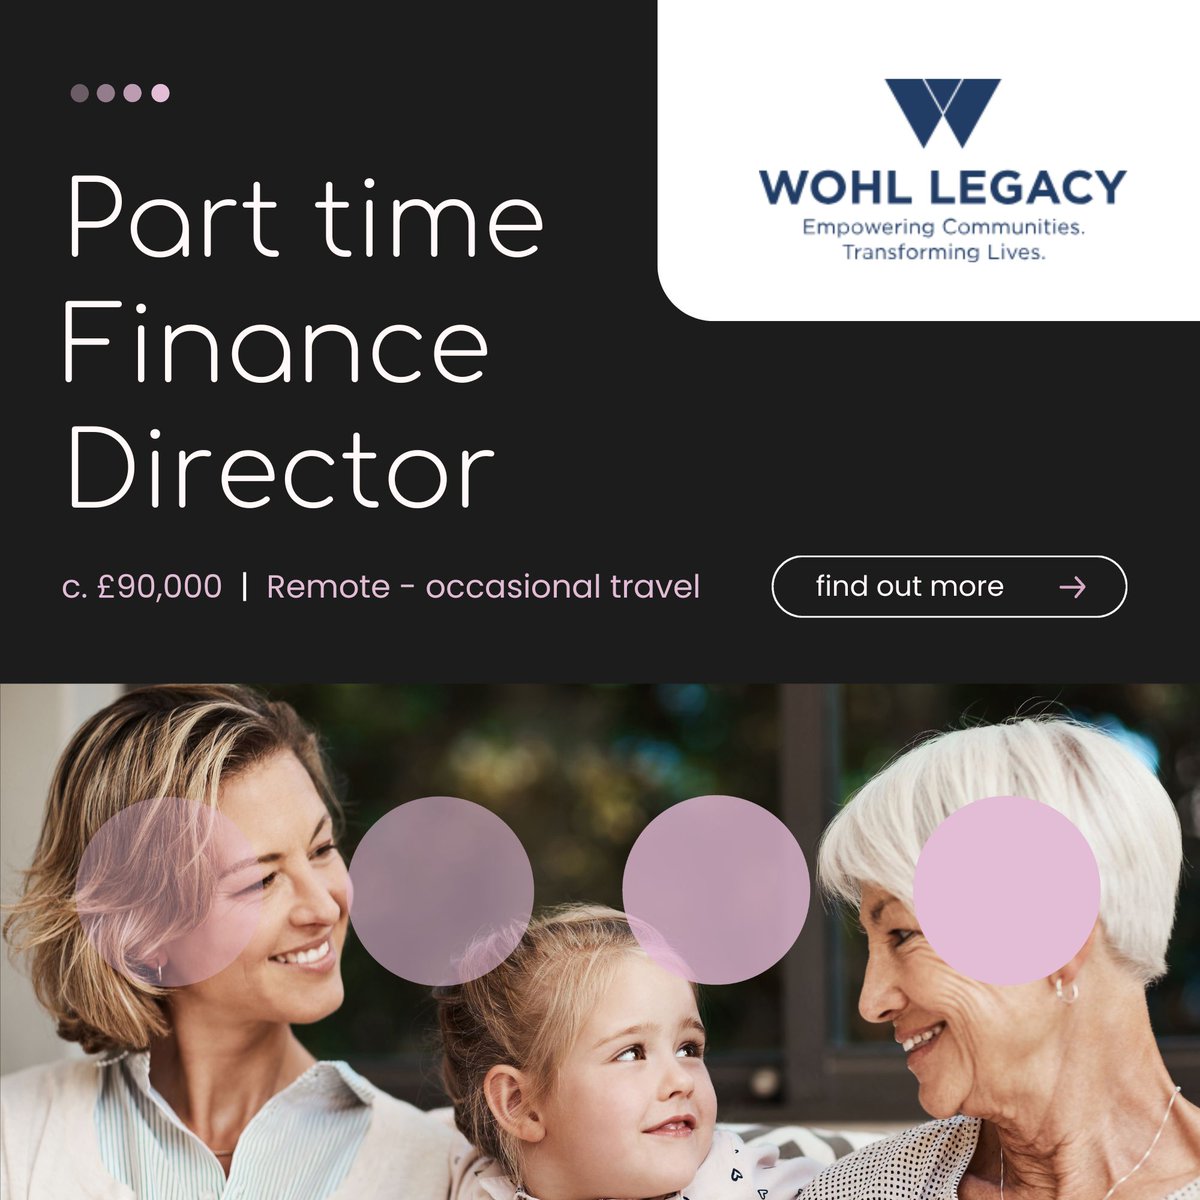 The application deadline is fast approaching. 

Don't miss out on your chance to apply for this amazing Part Time Finance Director role at The Wohl Legacy. 

#applynow > ow.ly/wmoy50RfJaV

#financedirector #charityjobs #charities #financejobs